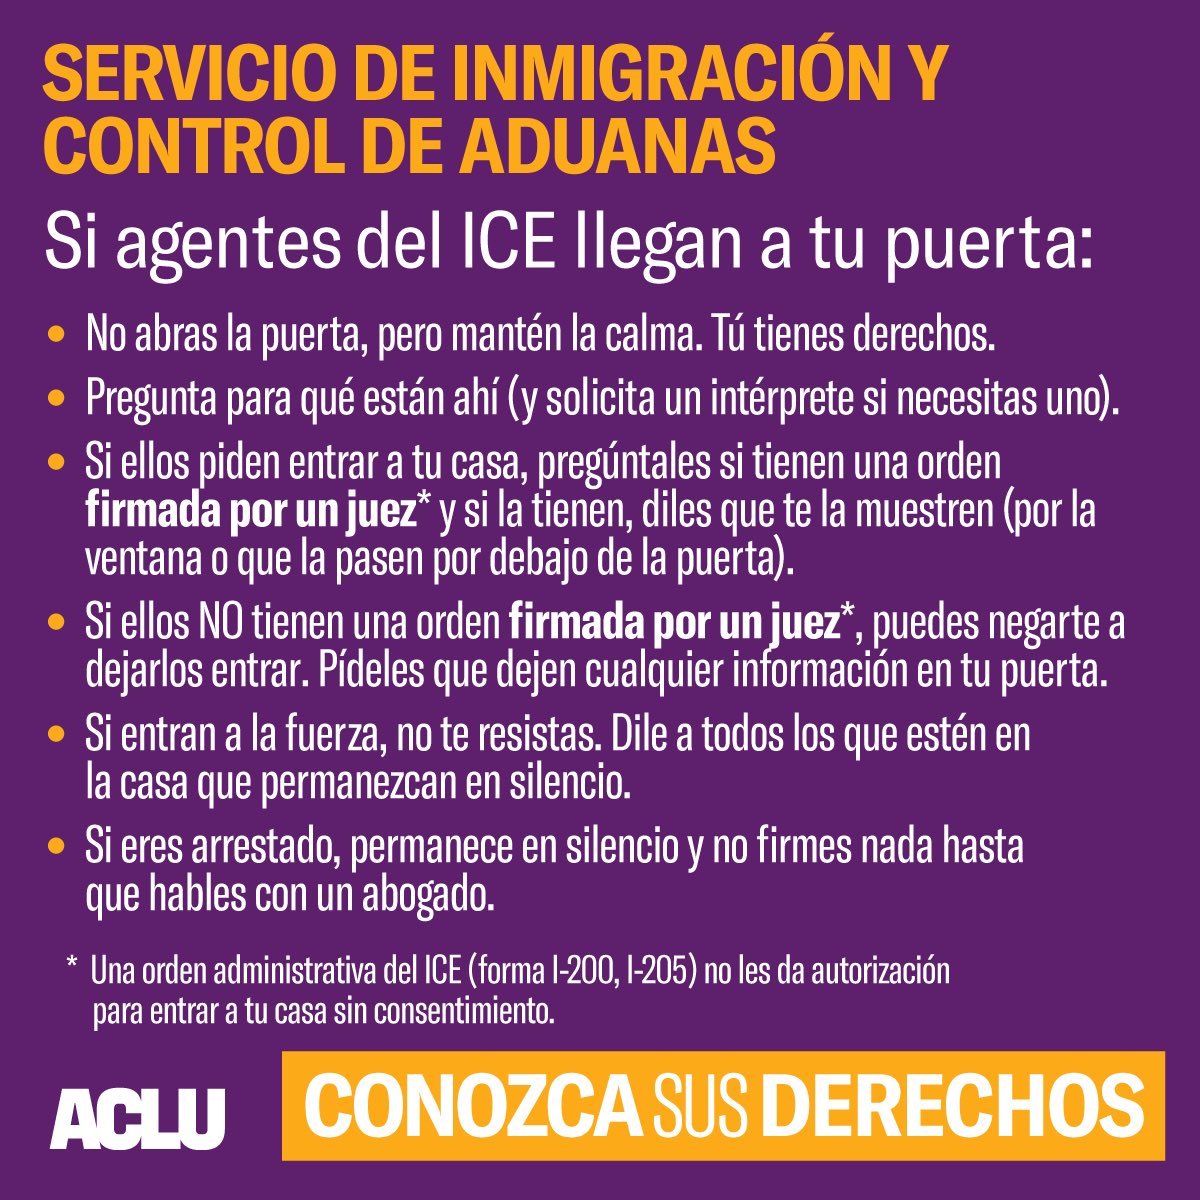 Now more than ever, we need everyone to know: WE HAVE RIGHTS.Share our  #KnowYourRights guides in multiple languages.Know Your Rights. Conozca Sus Derechos.